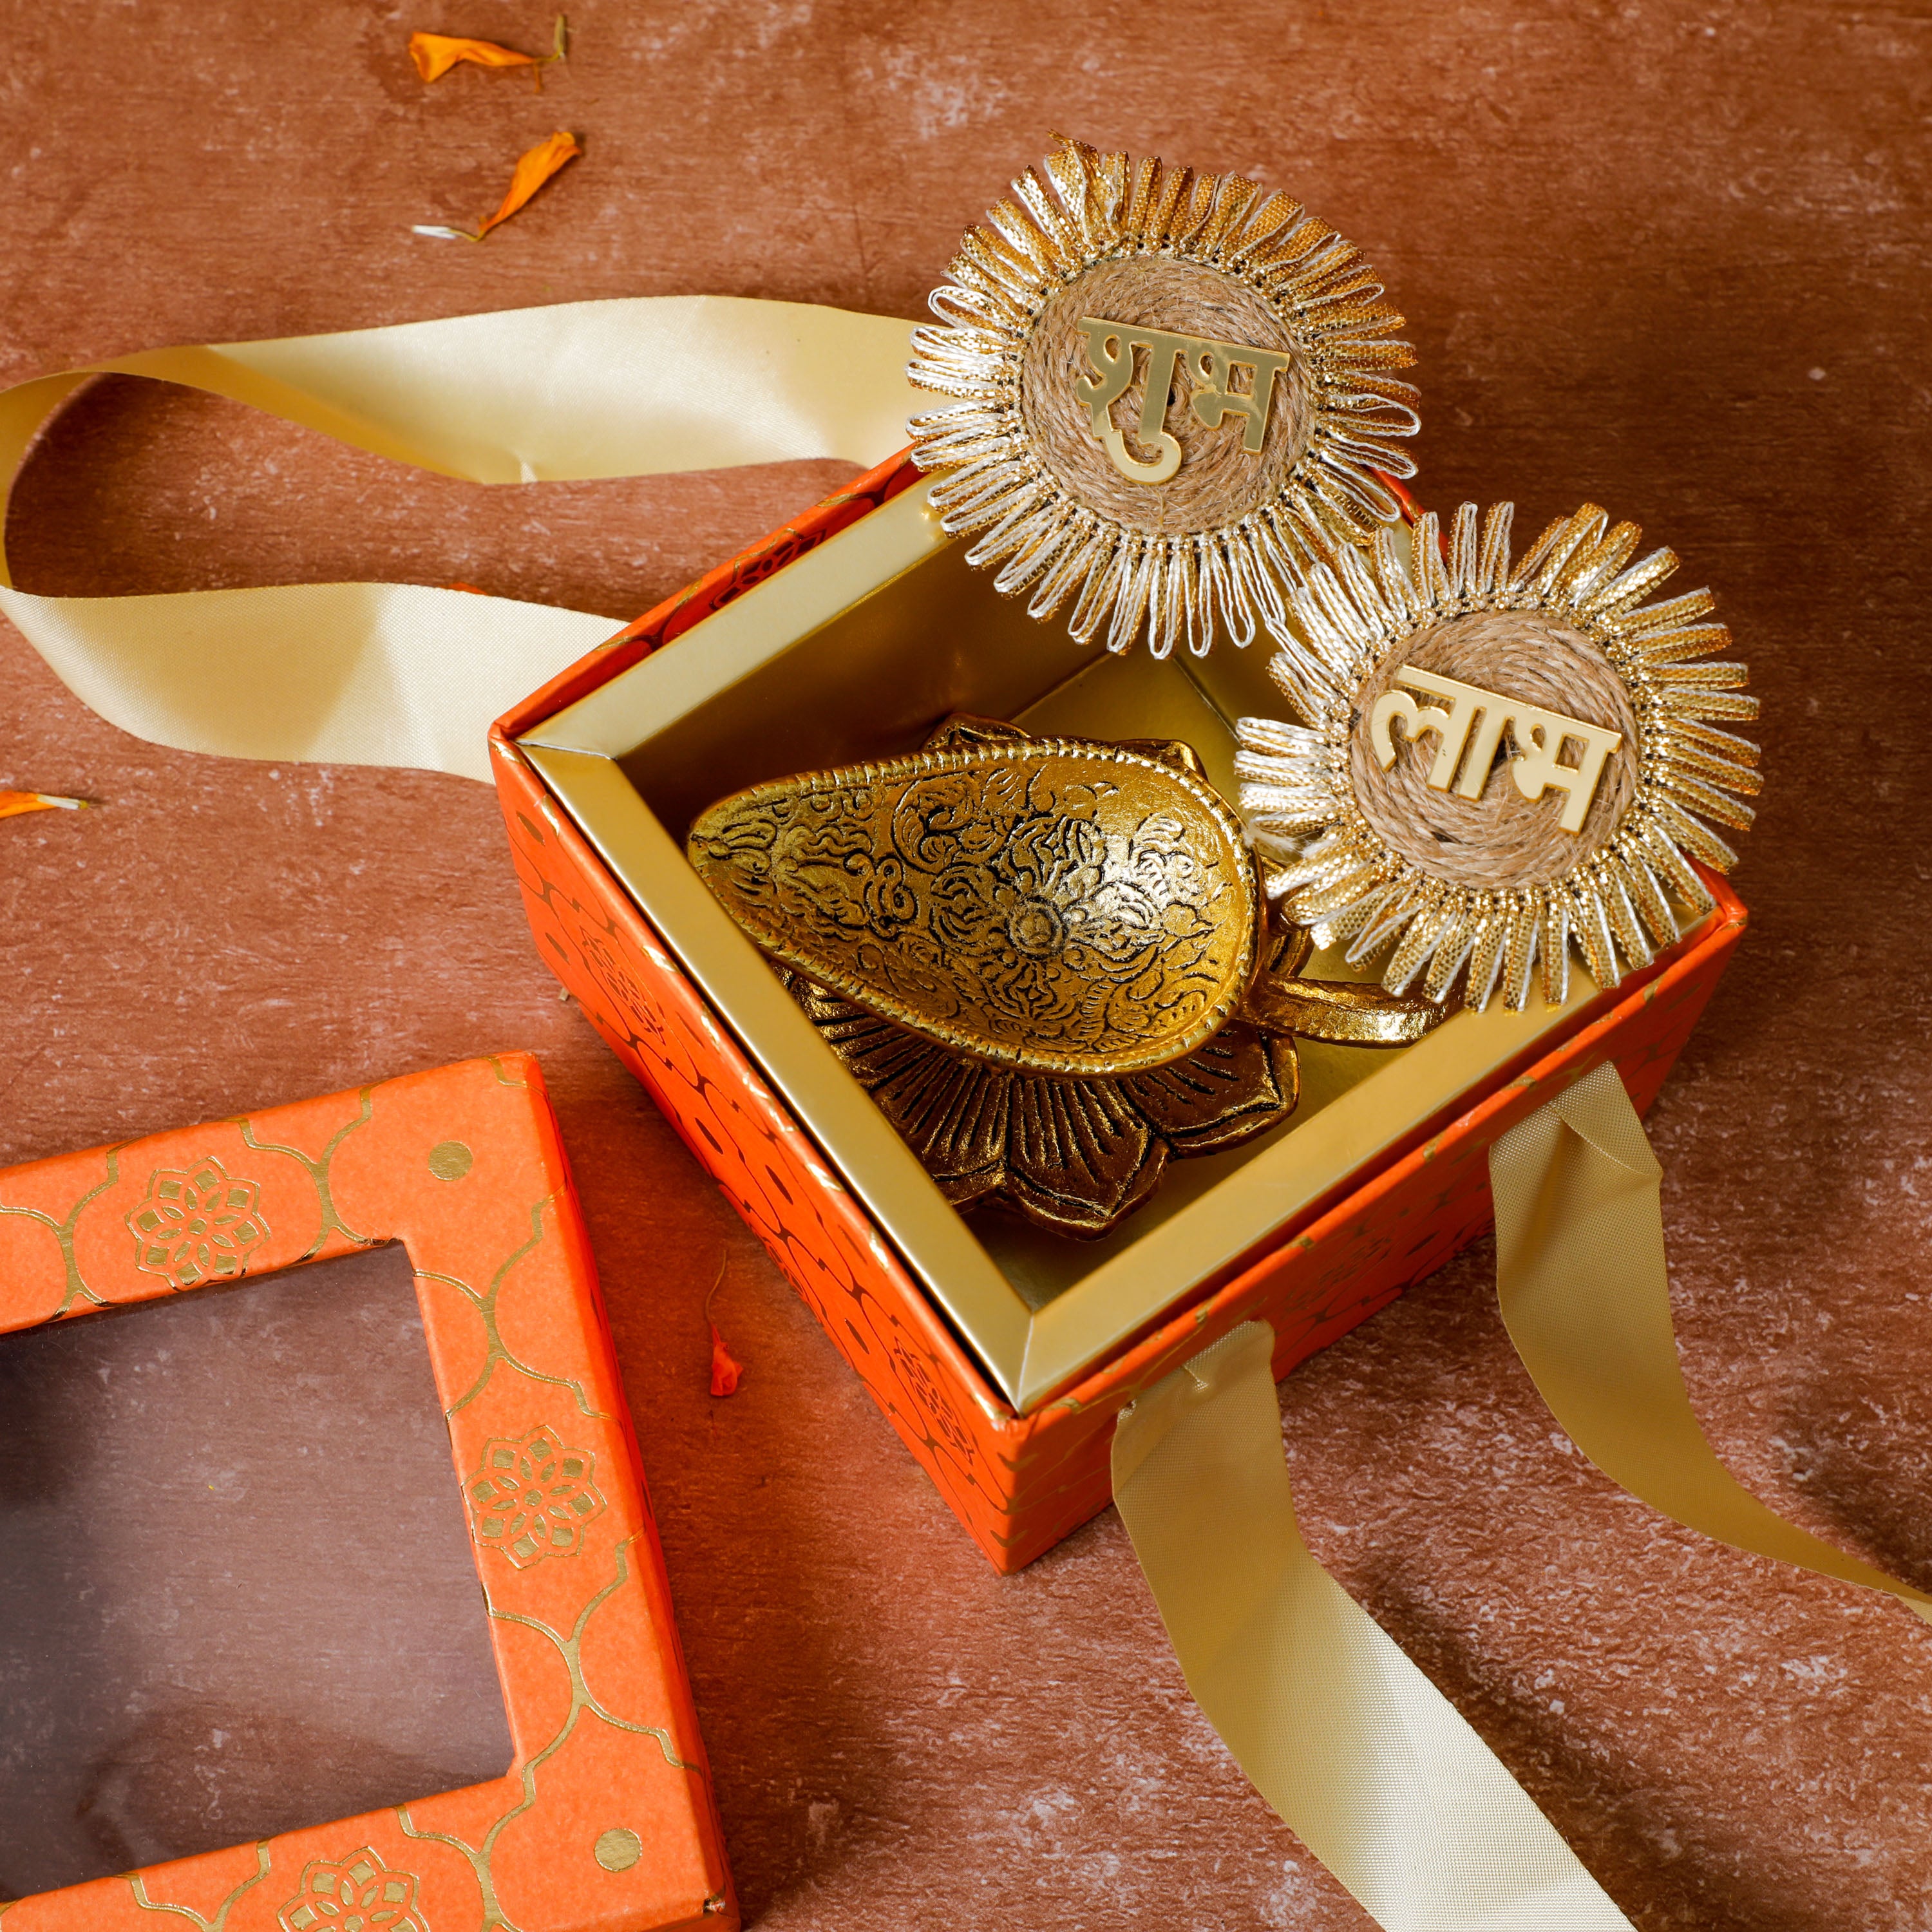 This thoughtful and delightful hamper is an ideal Diwali gift